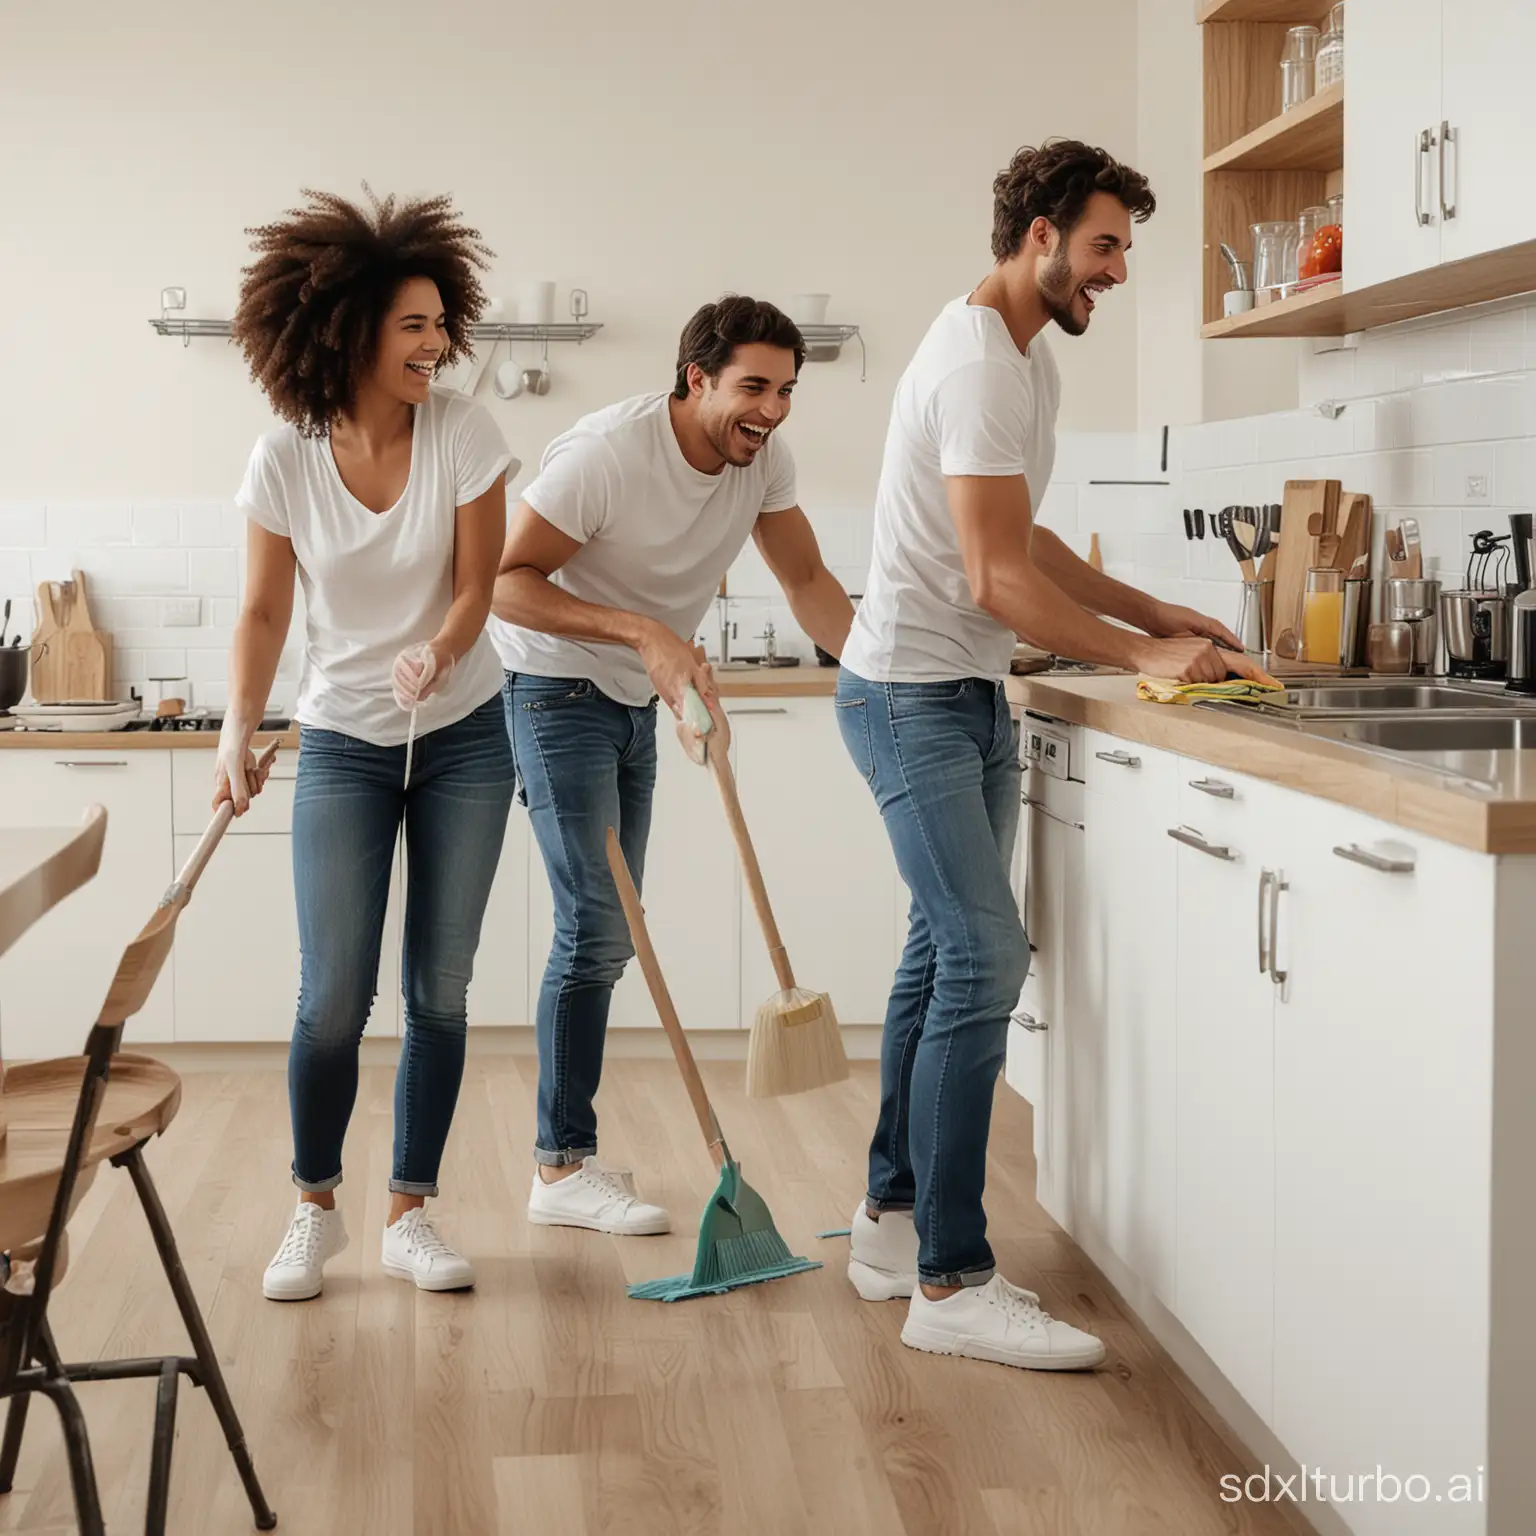 Happy-Couple-Cleaning-Kitchen-Together-Domestic-Bliss-Scene